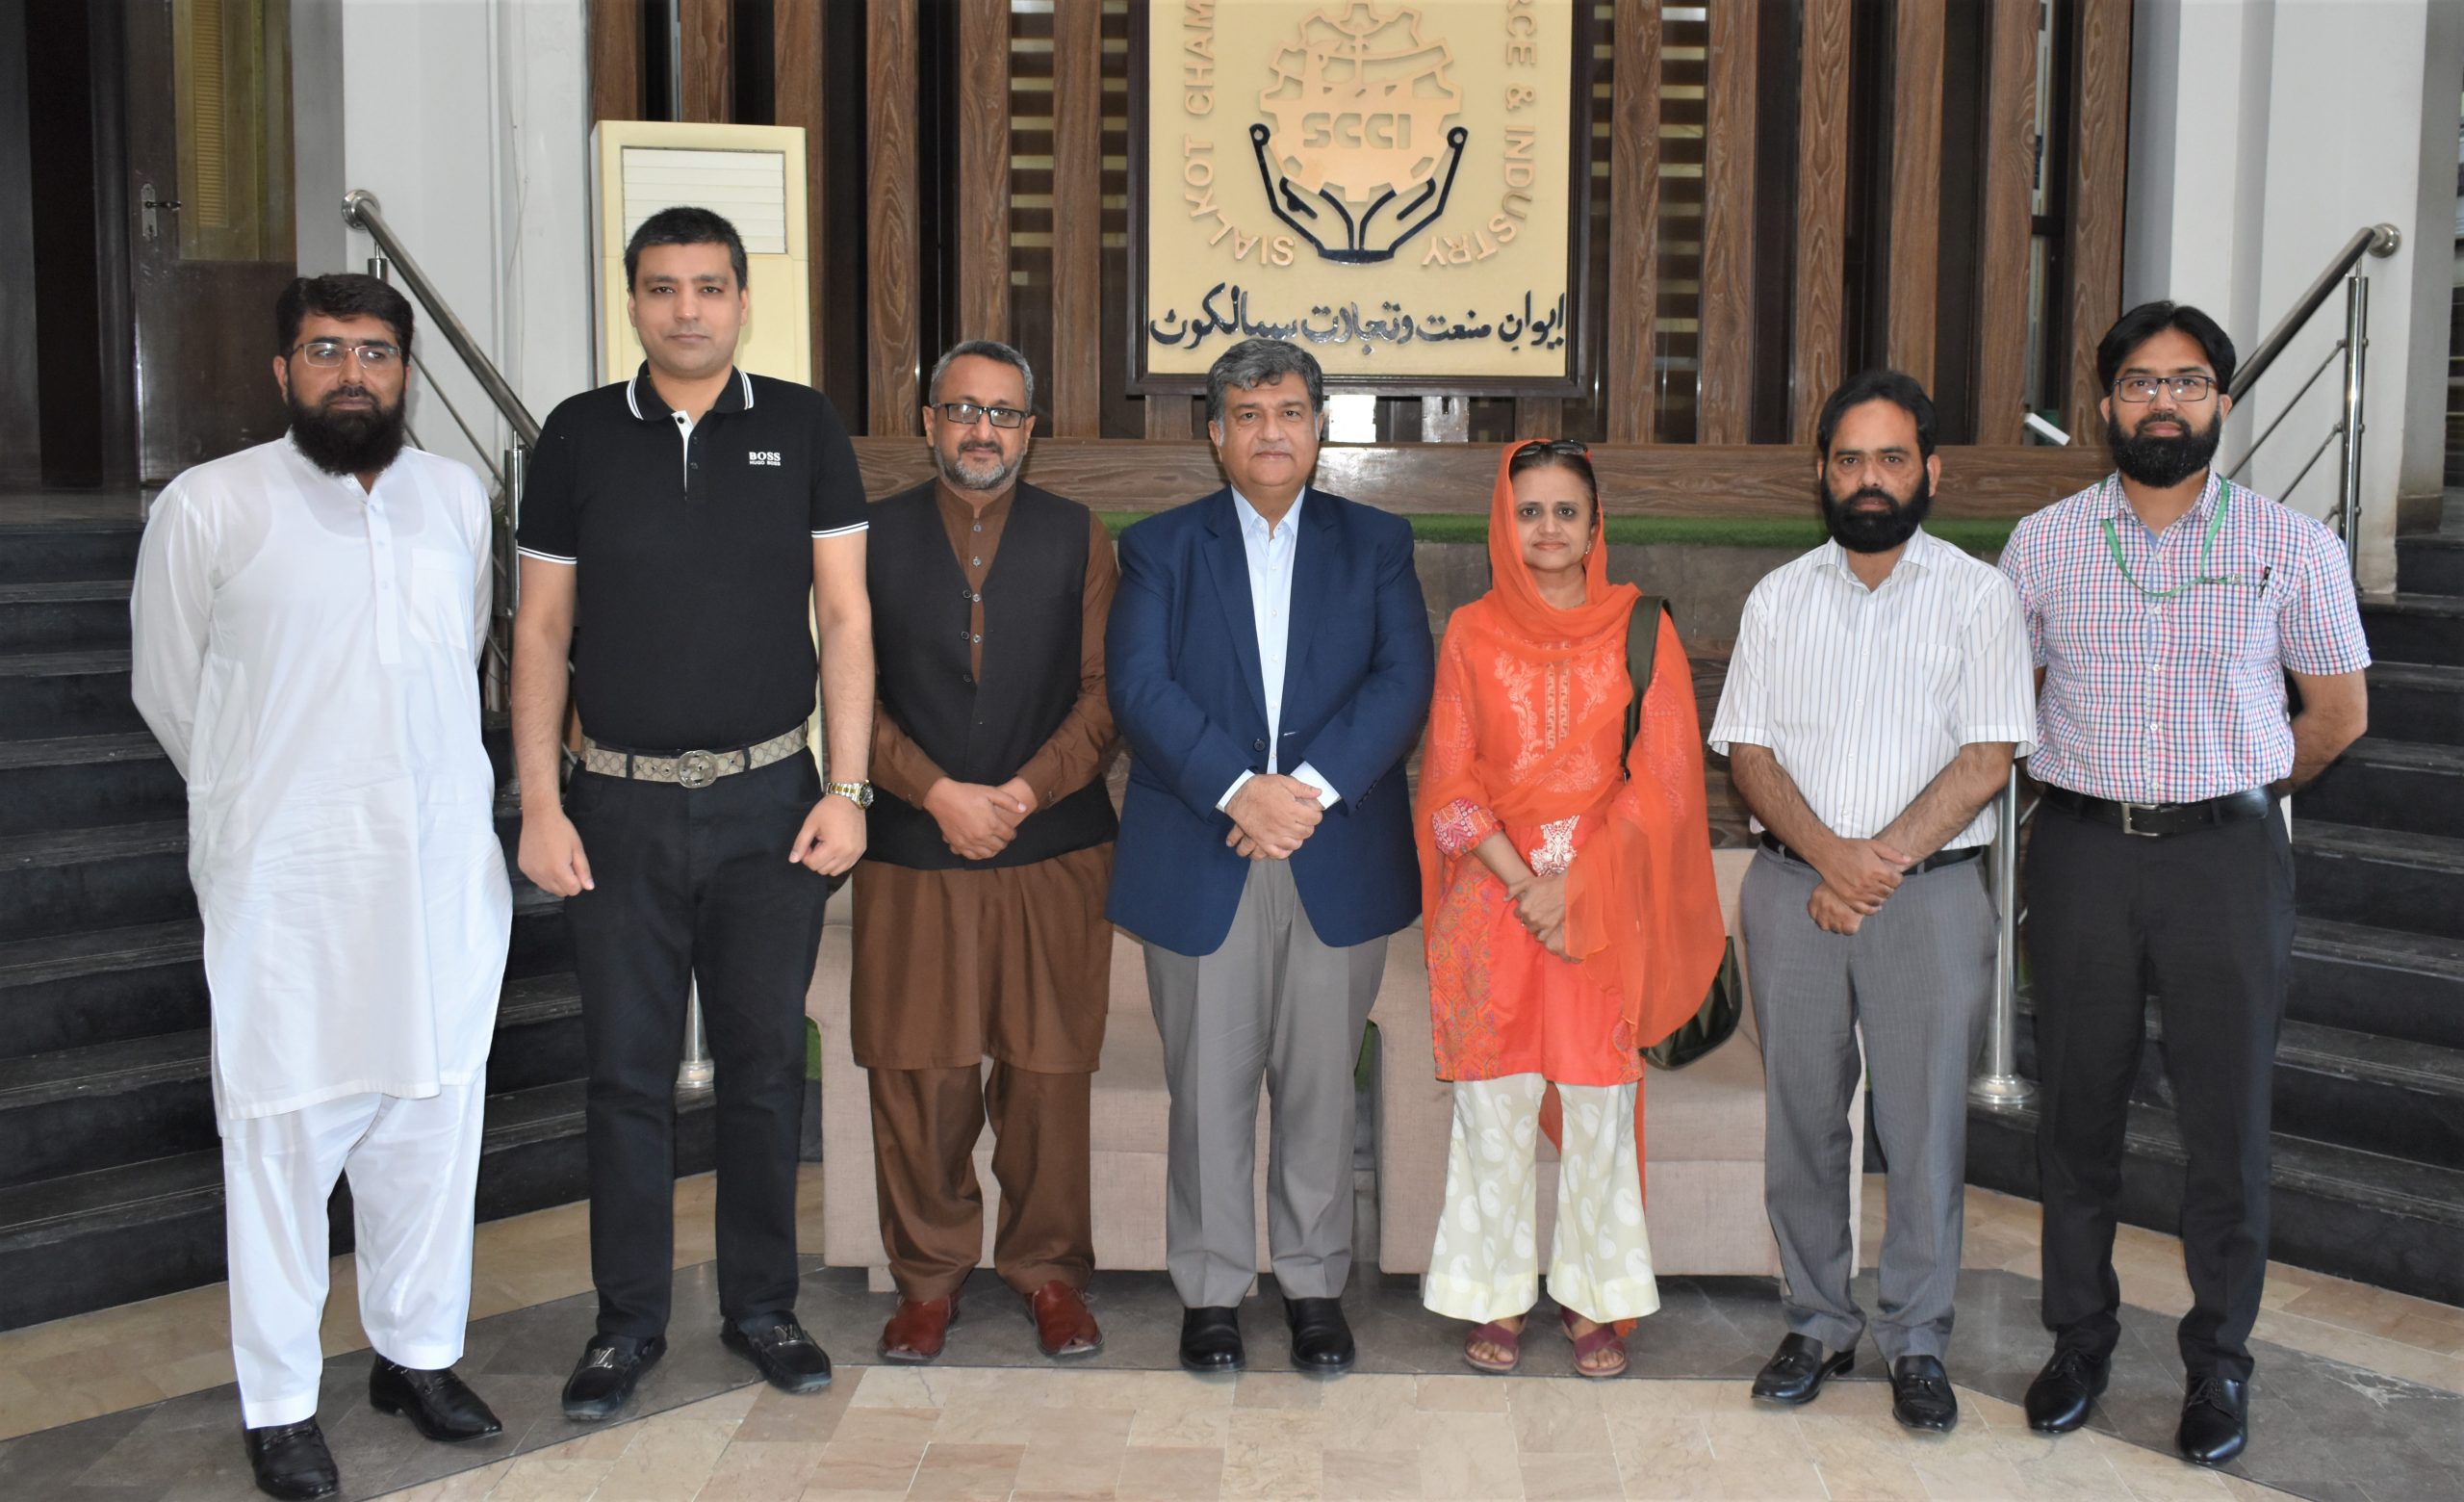 A delegation of Government College Women University Sialkot led by Dr. Asma Waheed Qureshi, Convener CIEC (GCWUS) visited the Sialkot Chamber of Commerce & Industry on April 26, 2022. President Sialkot Chamber Mian Imran Akbar and Senior Vice President Mr. Sheikh Zohaib Rafique Sethi SCCI had a meeting with the delegates to discuss the matter of formulating an Export Knowledge Compendium for Starting Export Business to benefit the young Entrepreneurs.